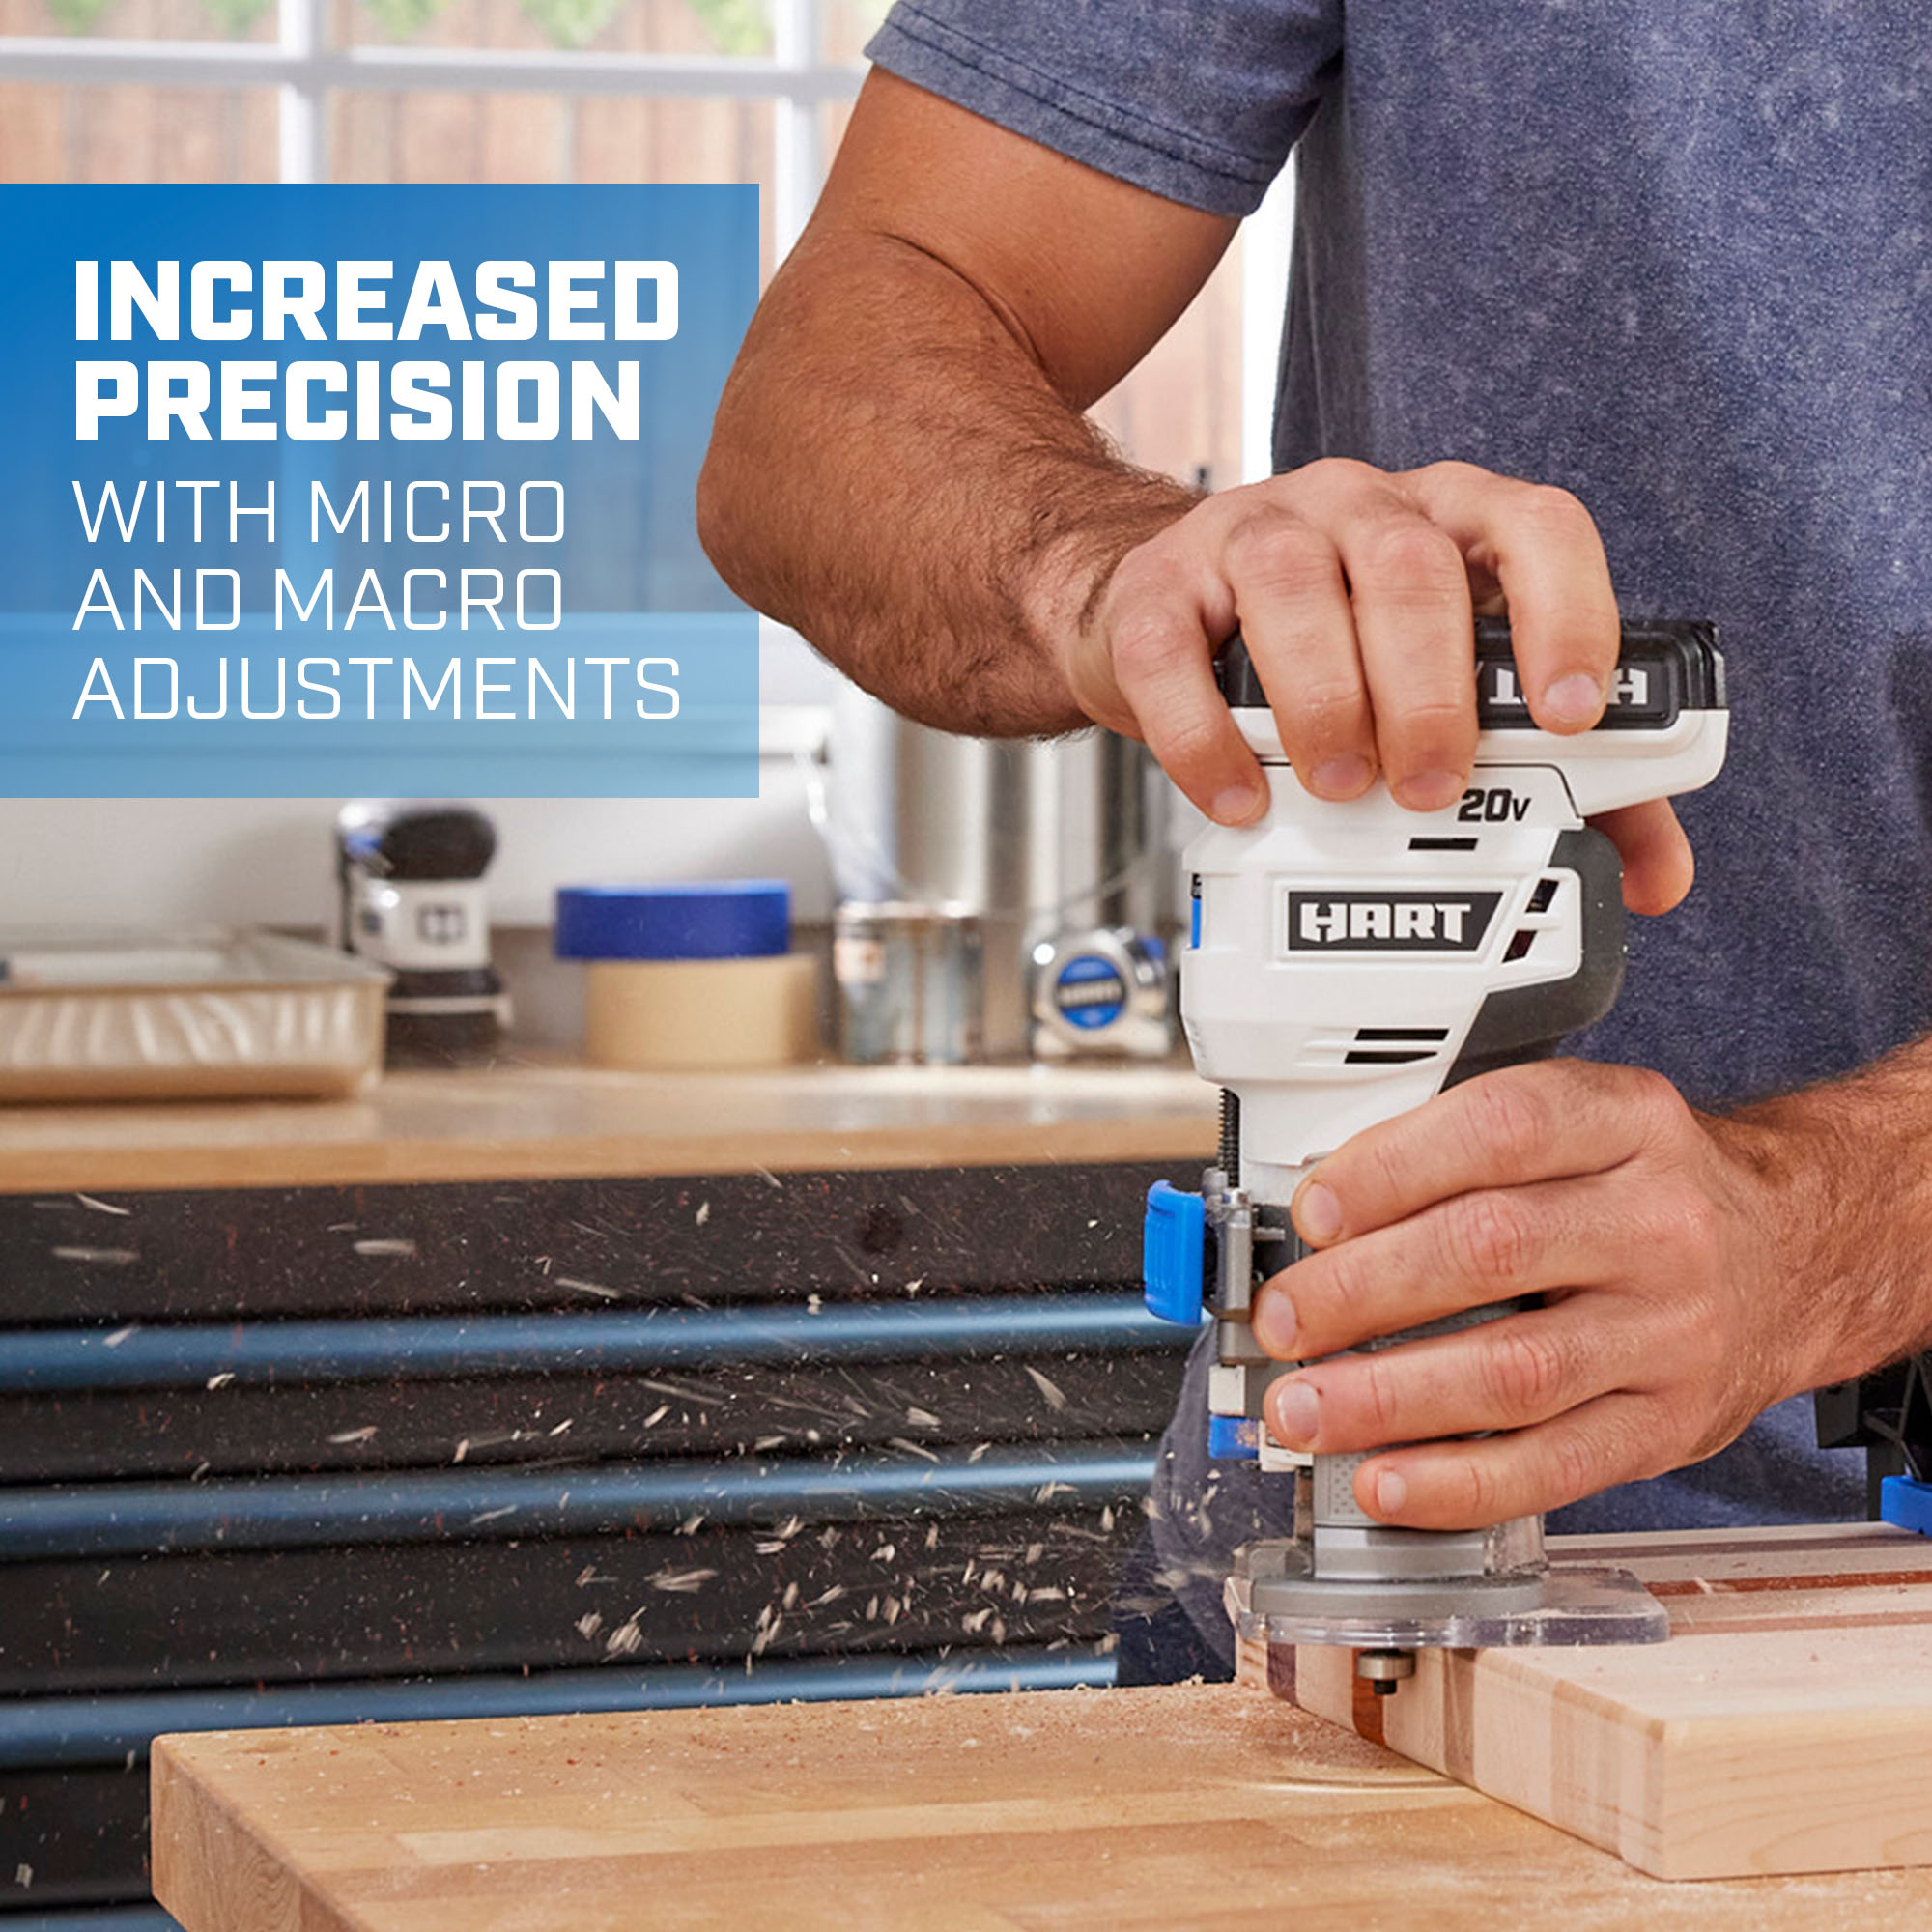 HART 20-Volt Cordless Trim Router Kit for Cutting, Shaping and Trimming, (1) 2.0Ah Lithium-Ion Battery - image 5 of 14